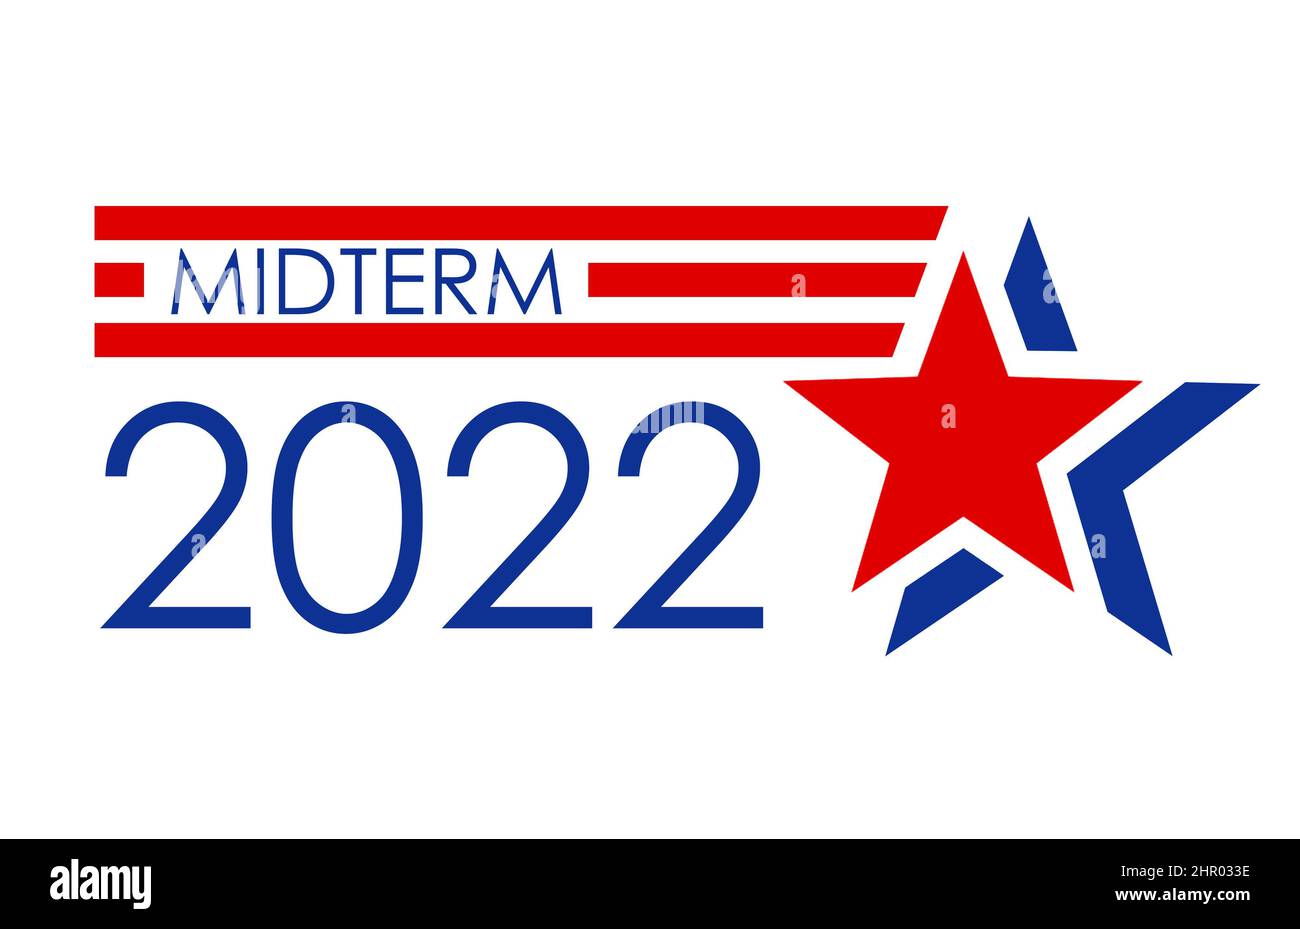 Midterm election 2022 in USA Stock Photo